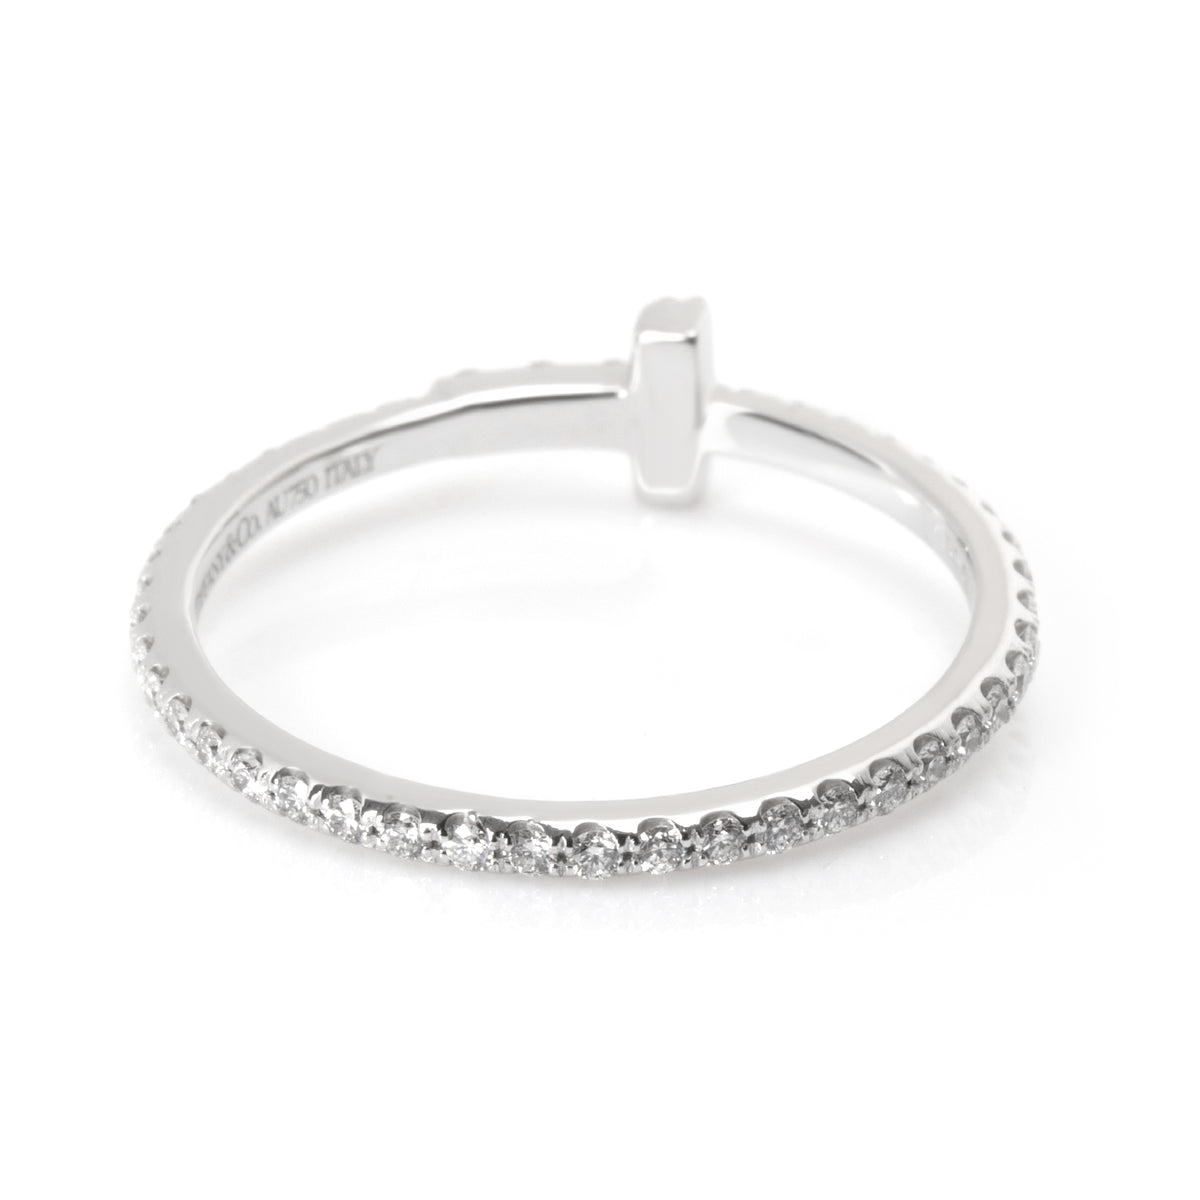 Tiffany & Co. T Diamond Eternity Ring in 18KT White Gold 0.25 CTW